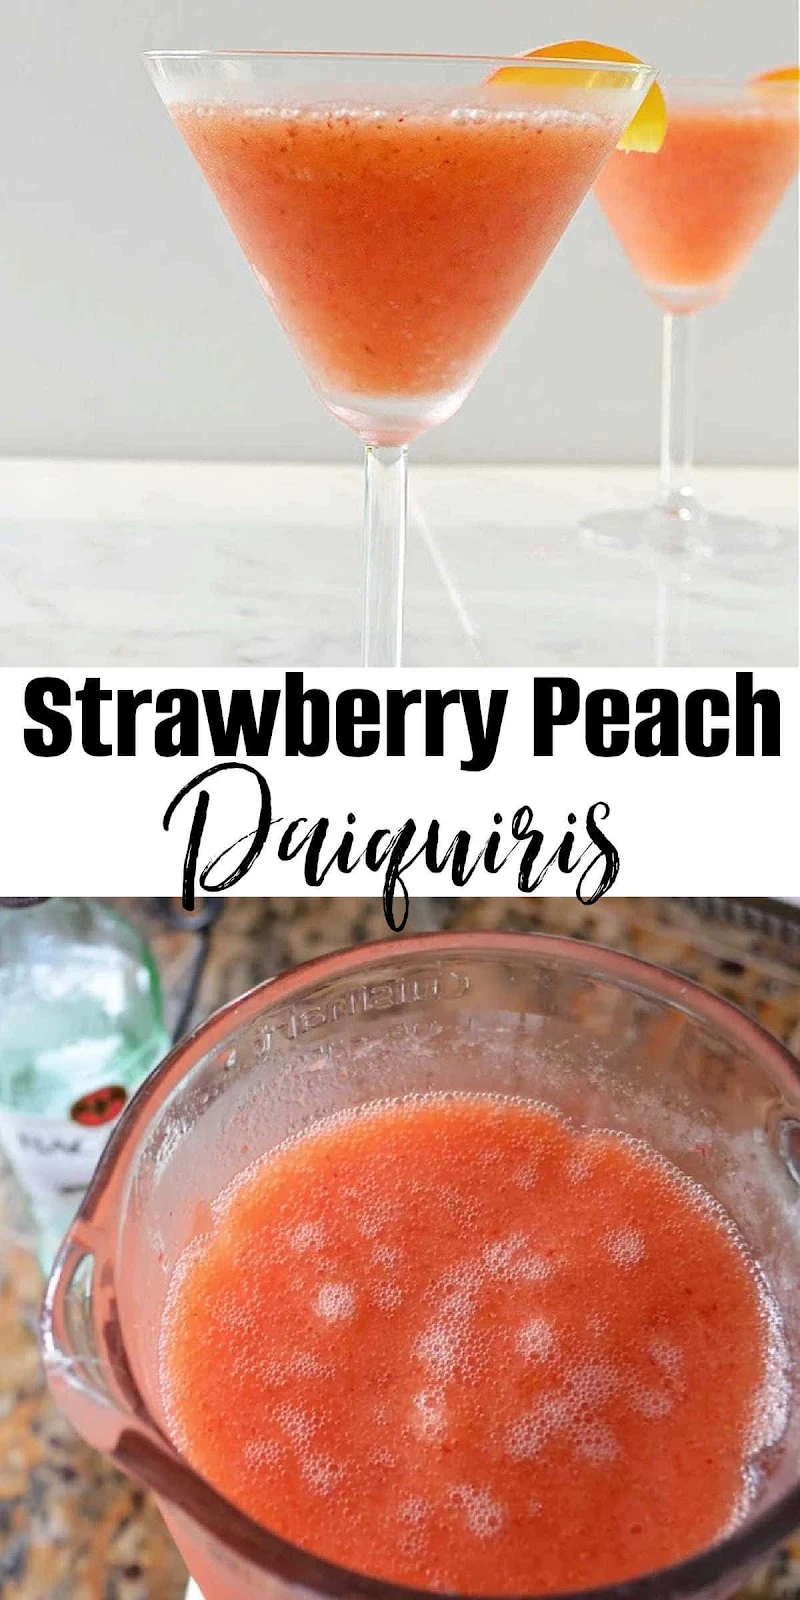 2 Photos of Strawberry Peach Daiquiris the top is in a serving glass and the bottom in a blender. There is a white banner between the two photos with black text Strawberry Peach Daiquiris.